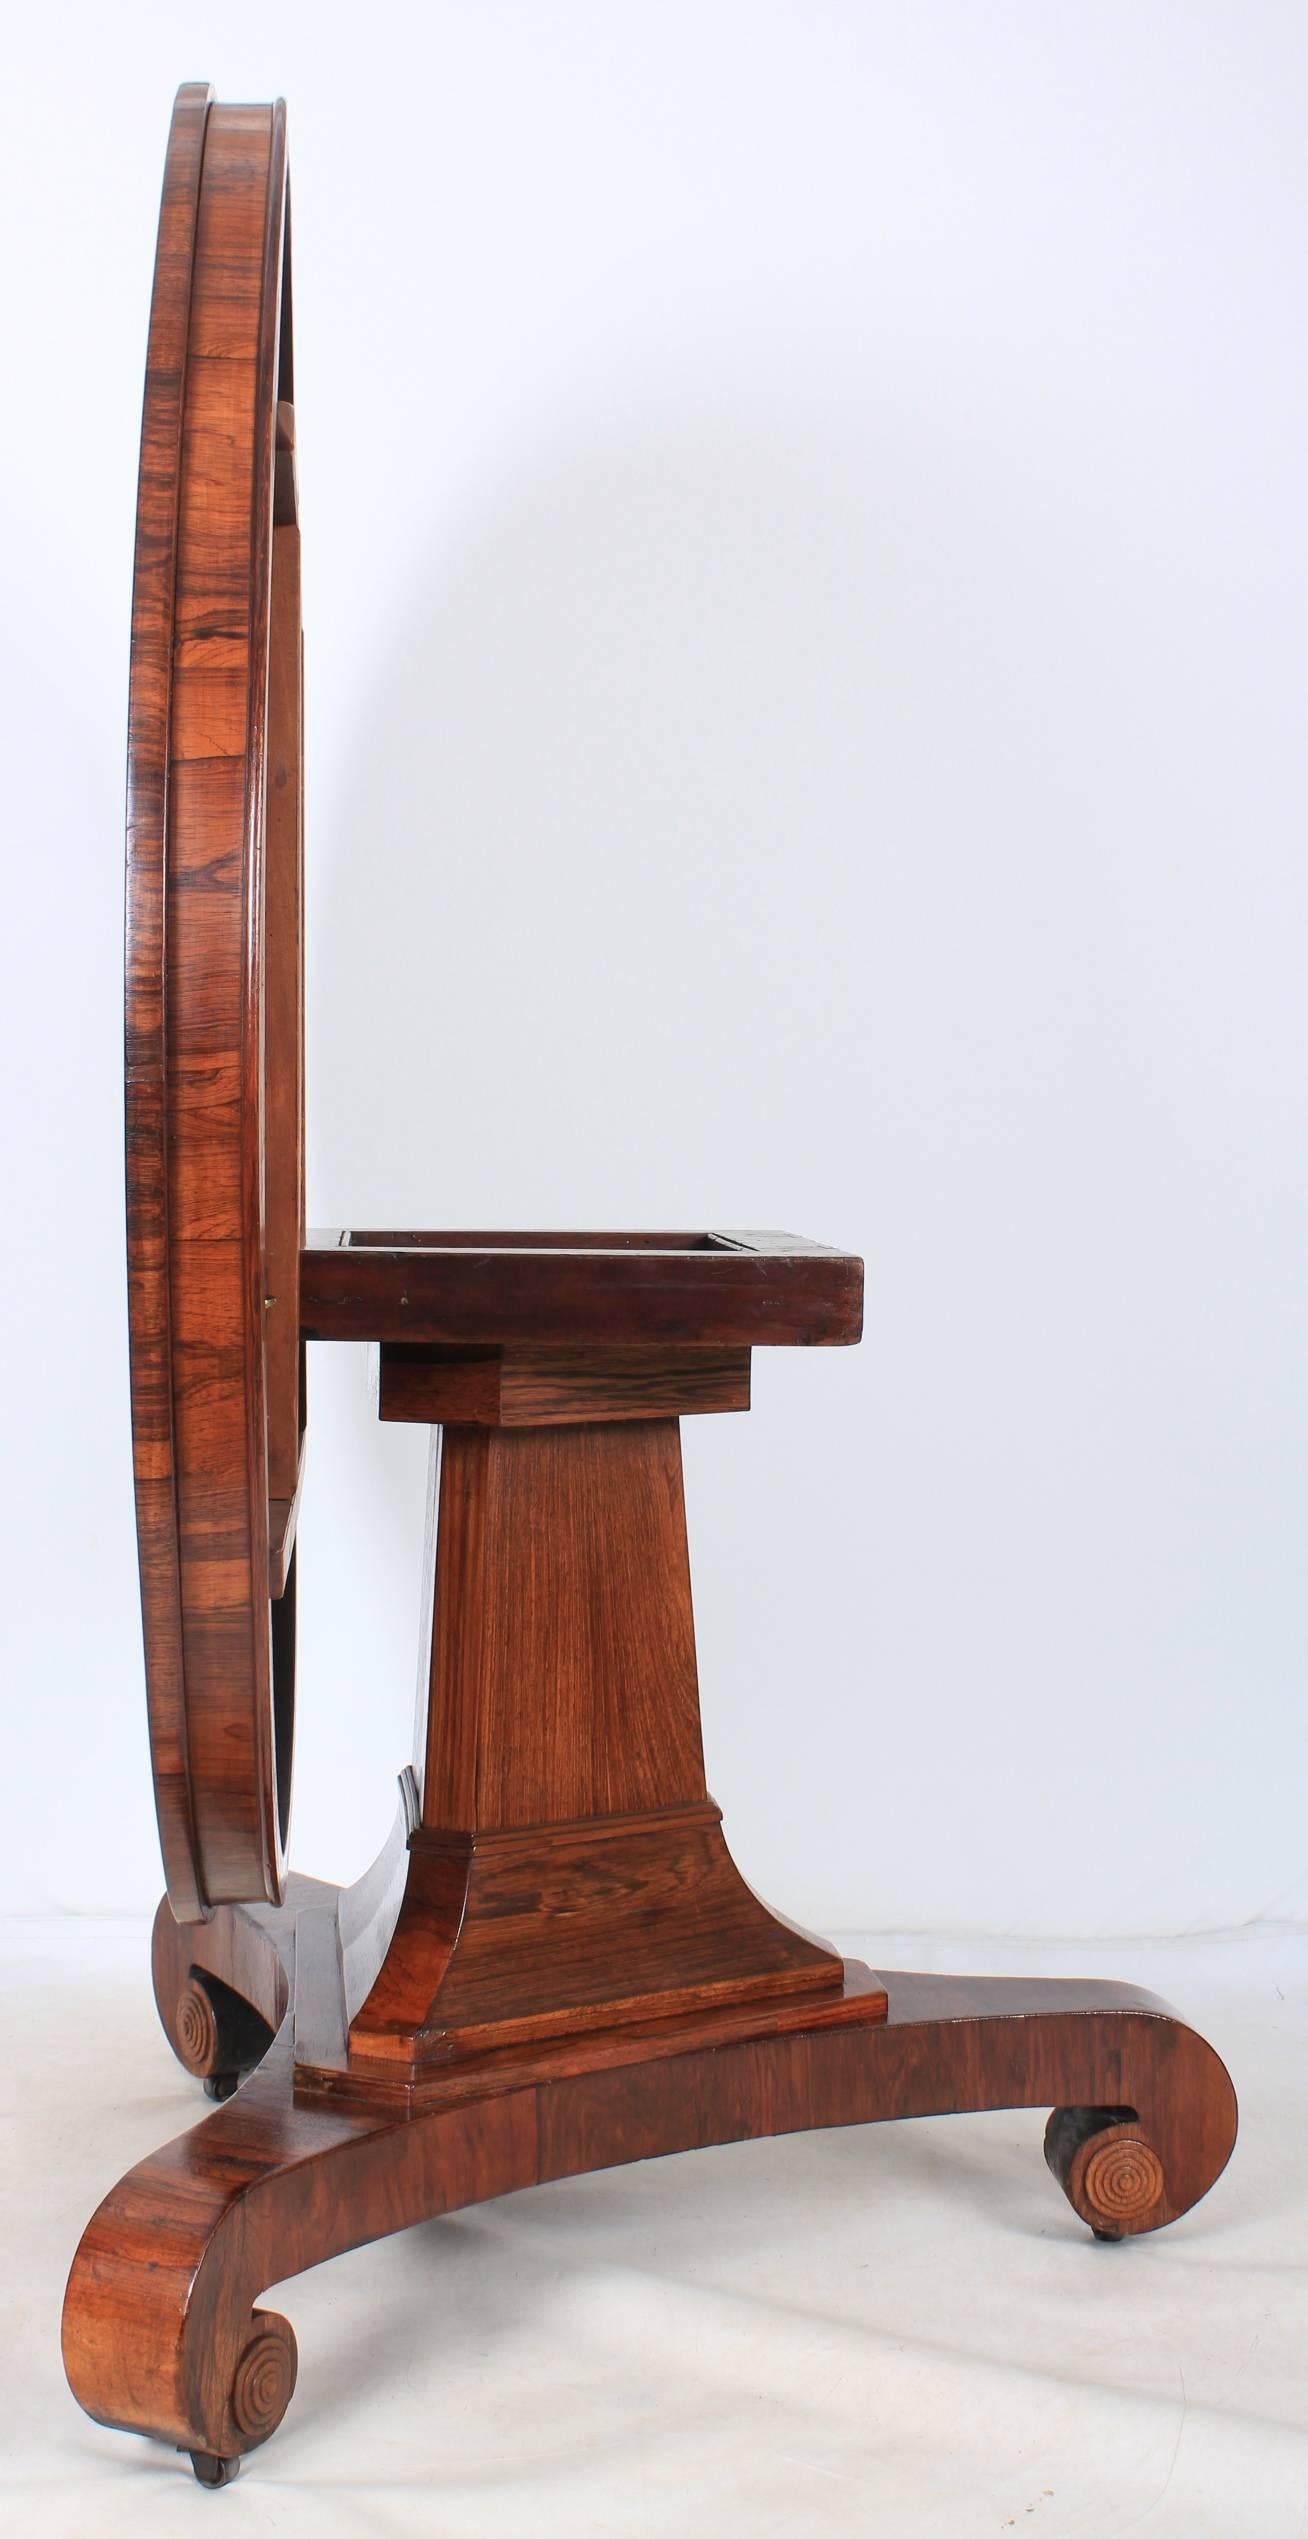 English, circa 1810.
In great condition, ready for use in the home.
Boasting a great colour and patina, with a removable tilt-top, held in place with by two screw pins and a latch.
On a lovely triform base, with three scroll feet with decorative